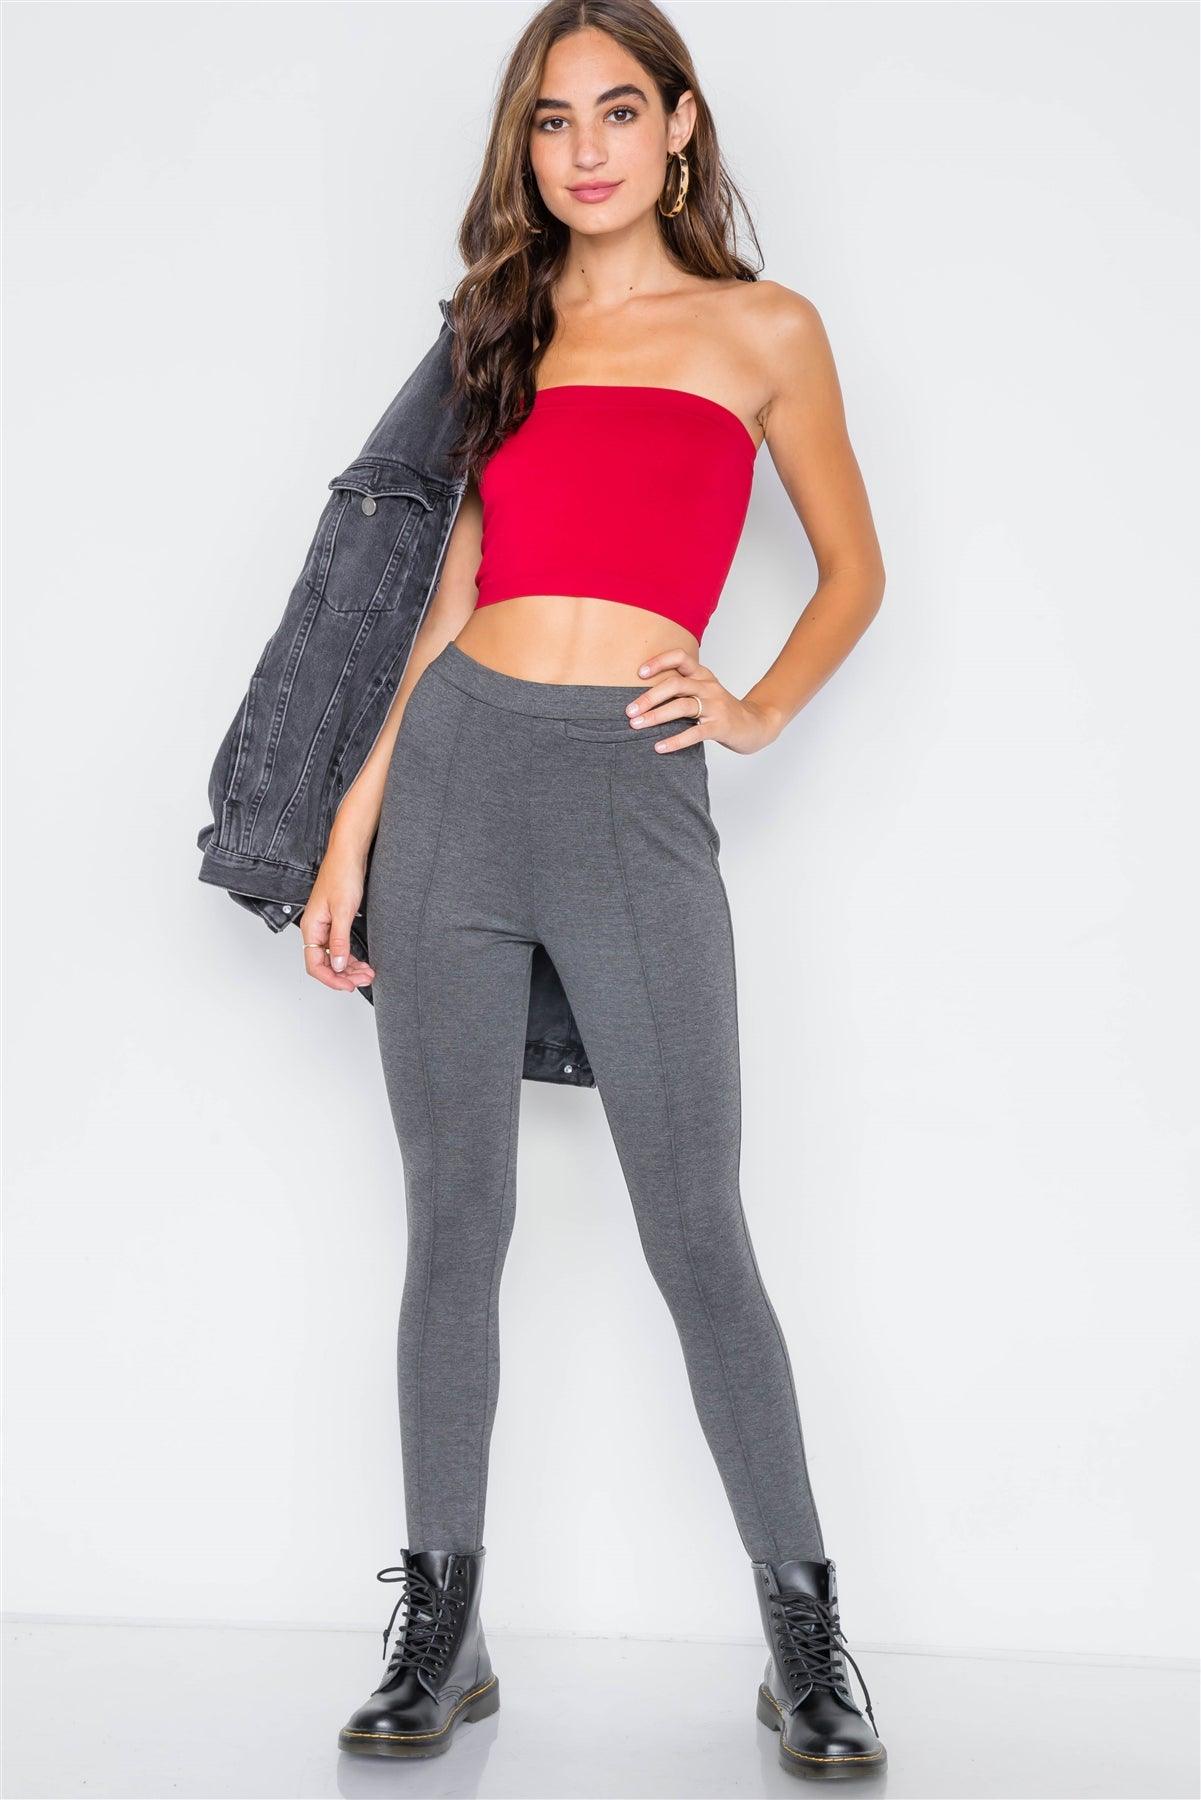 Heather Charcoal Thick Knit Leggings Pant / 2-2-2